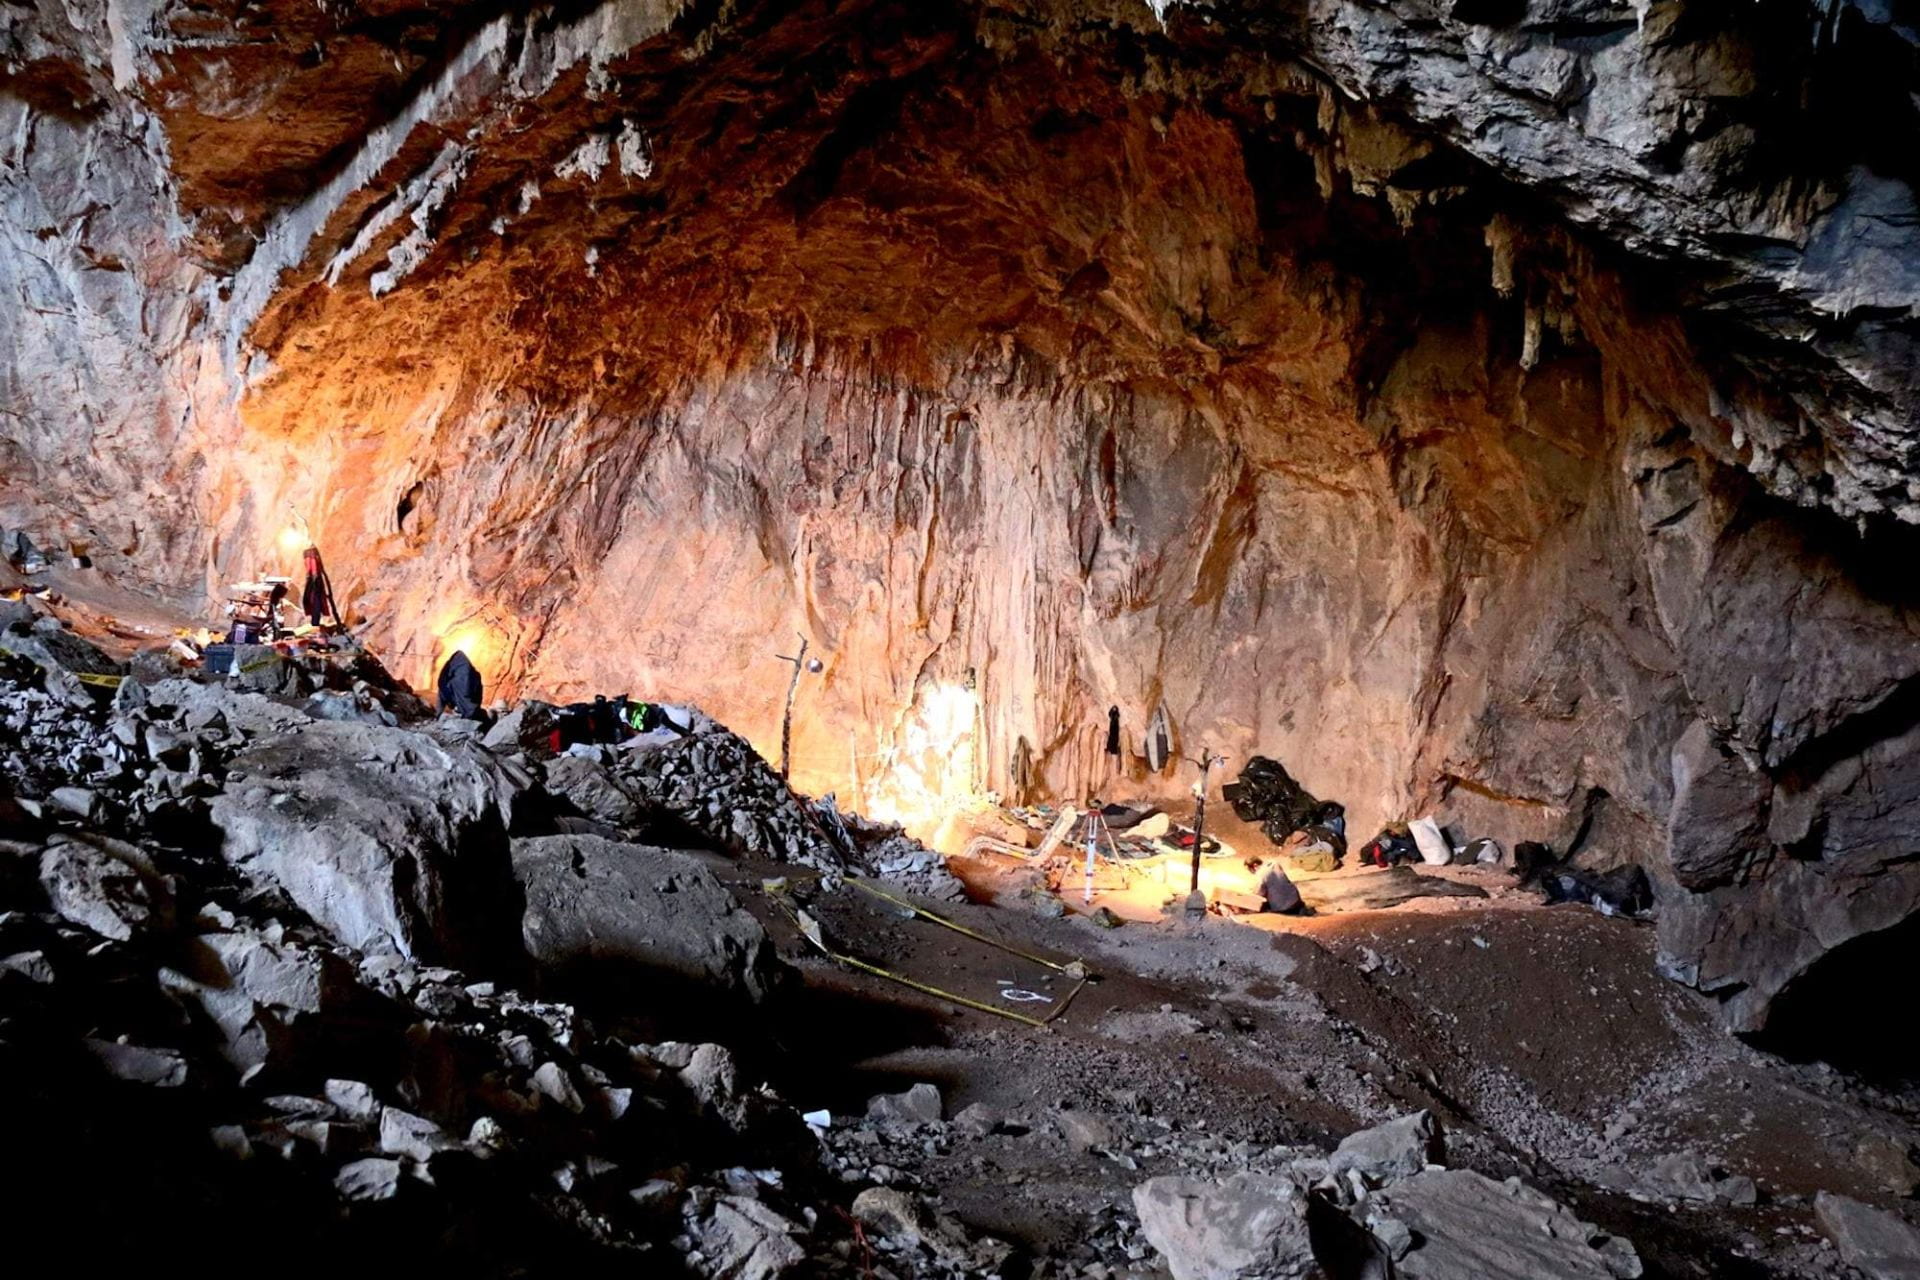 Photo of the Chiquihuite Cave in Zacatecas, Mexico